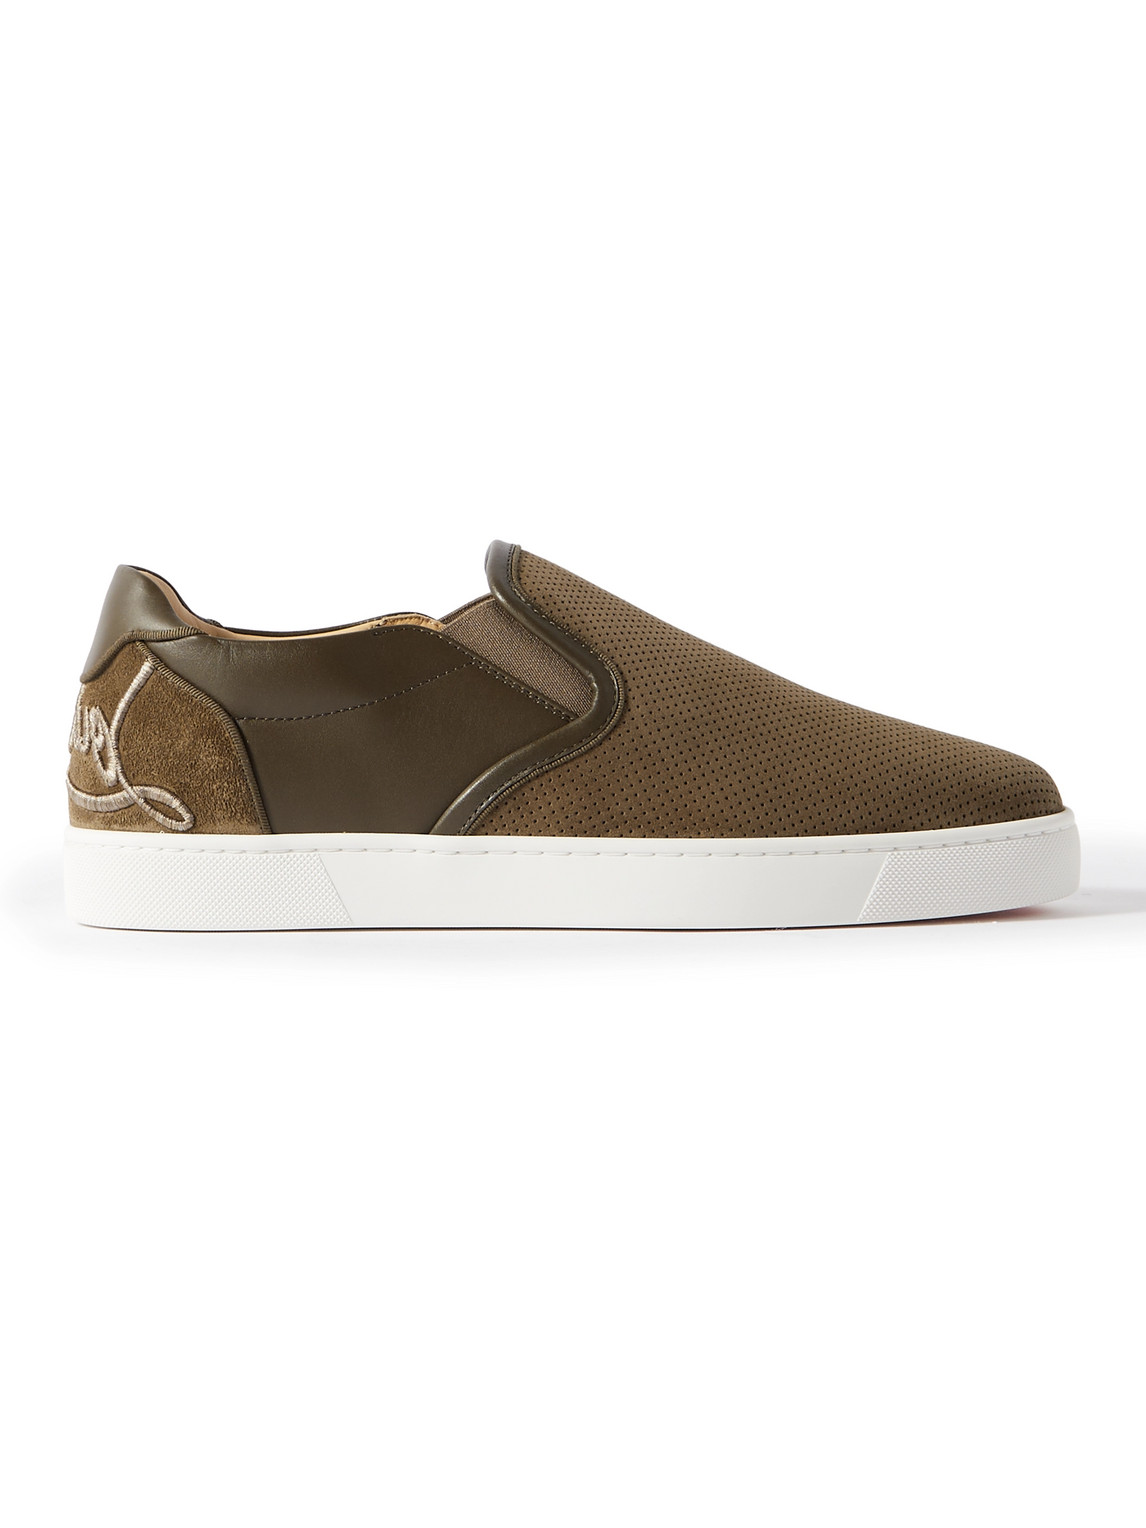 Christian Louboutin Fun Sailor Leather-trimmed Perforated Suede Slip-on Sneakers In Green